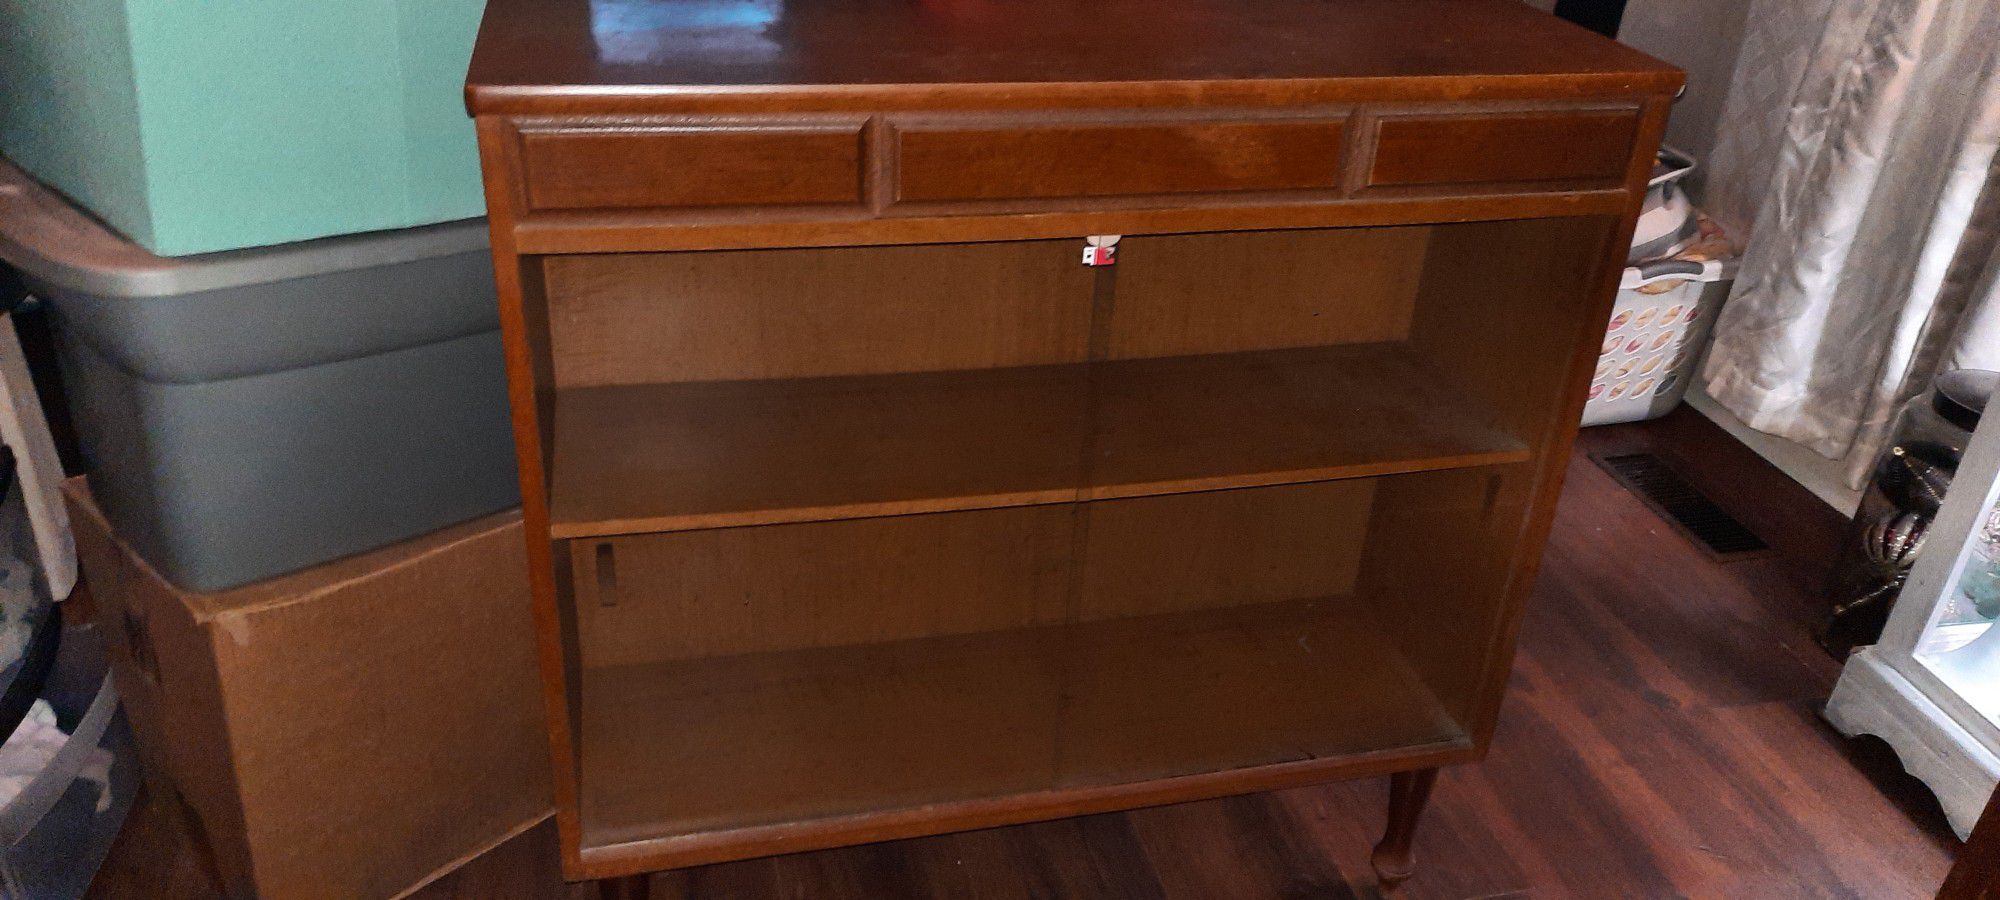 Old Nick Nack Cabinet With 2 Glass Sliding Doors 